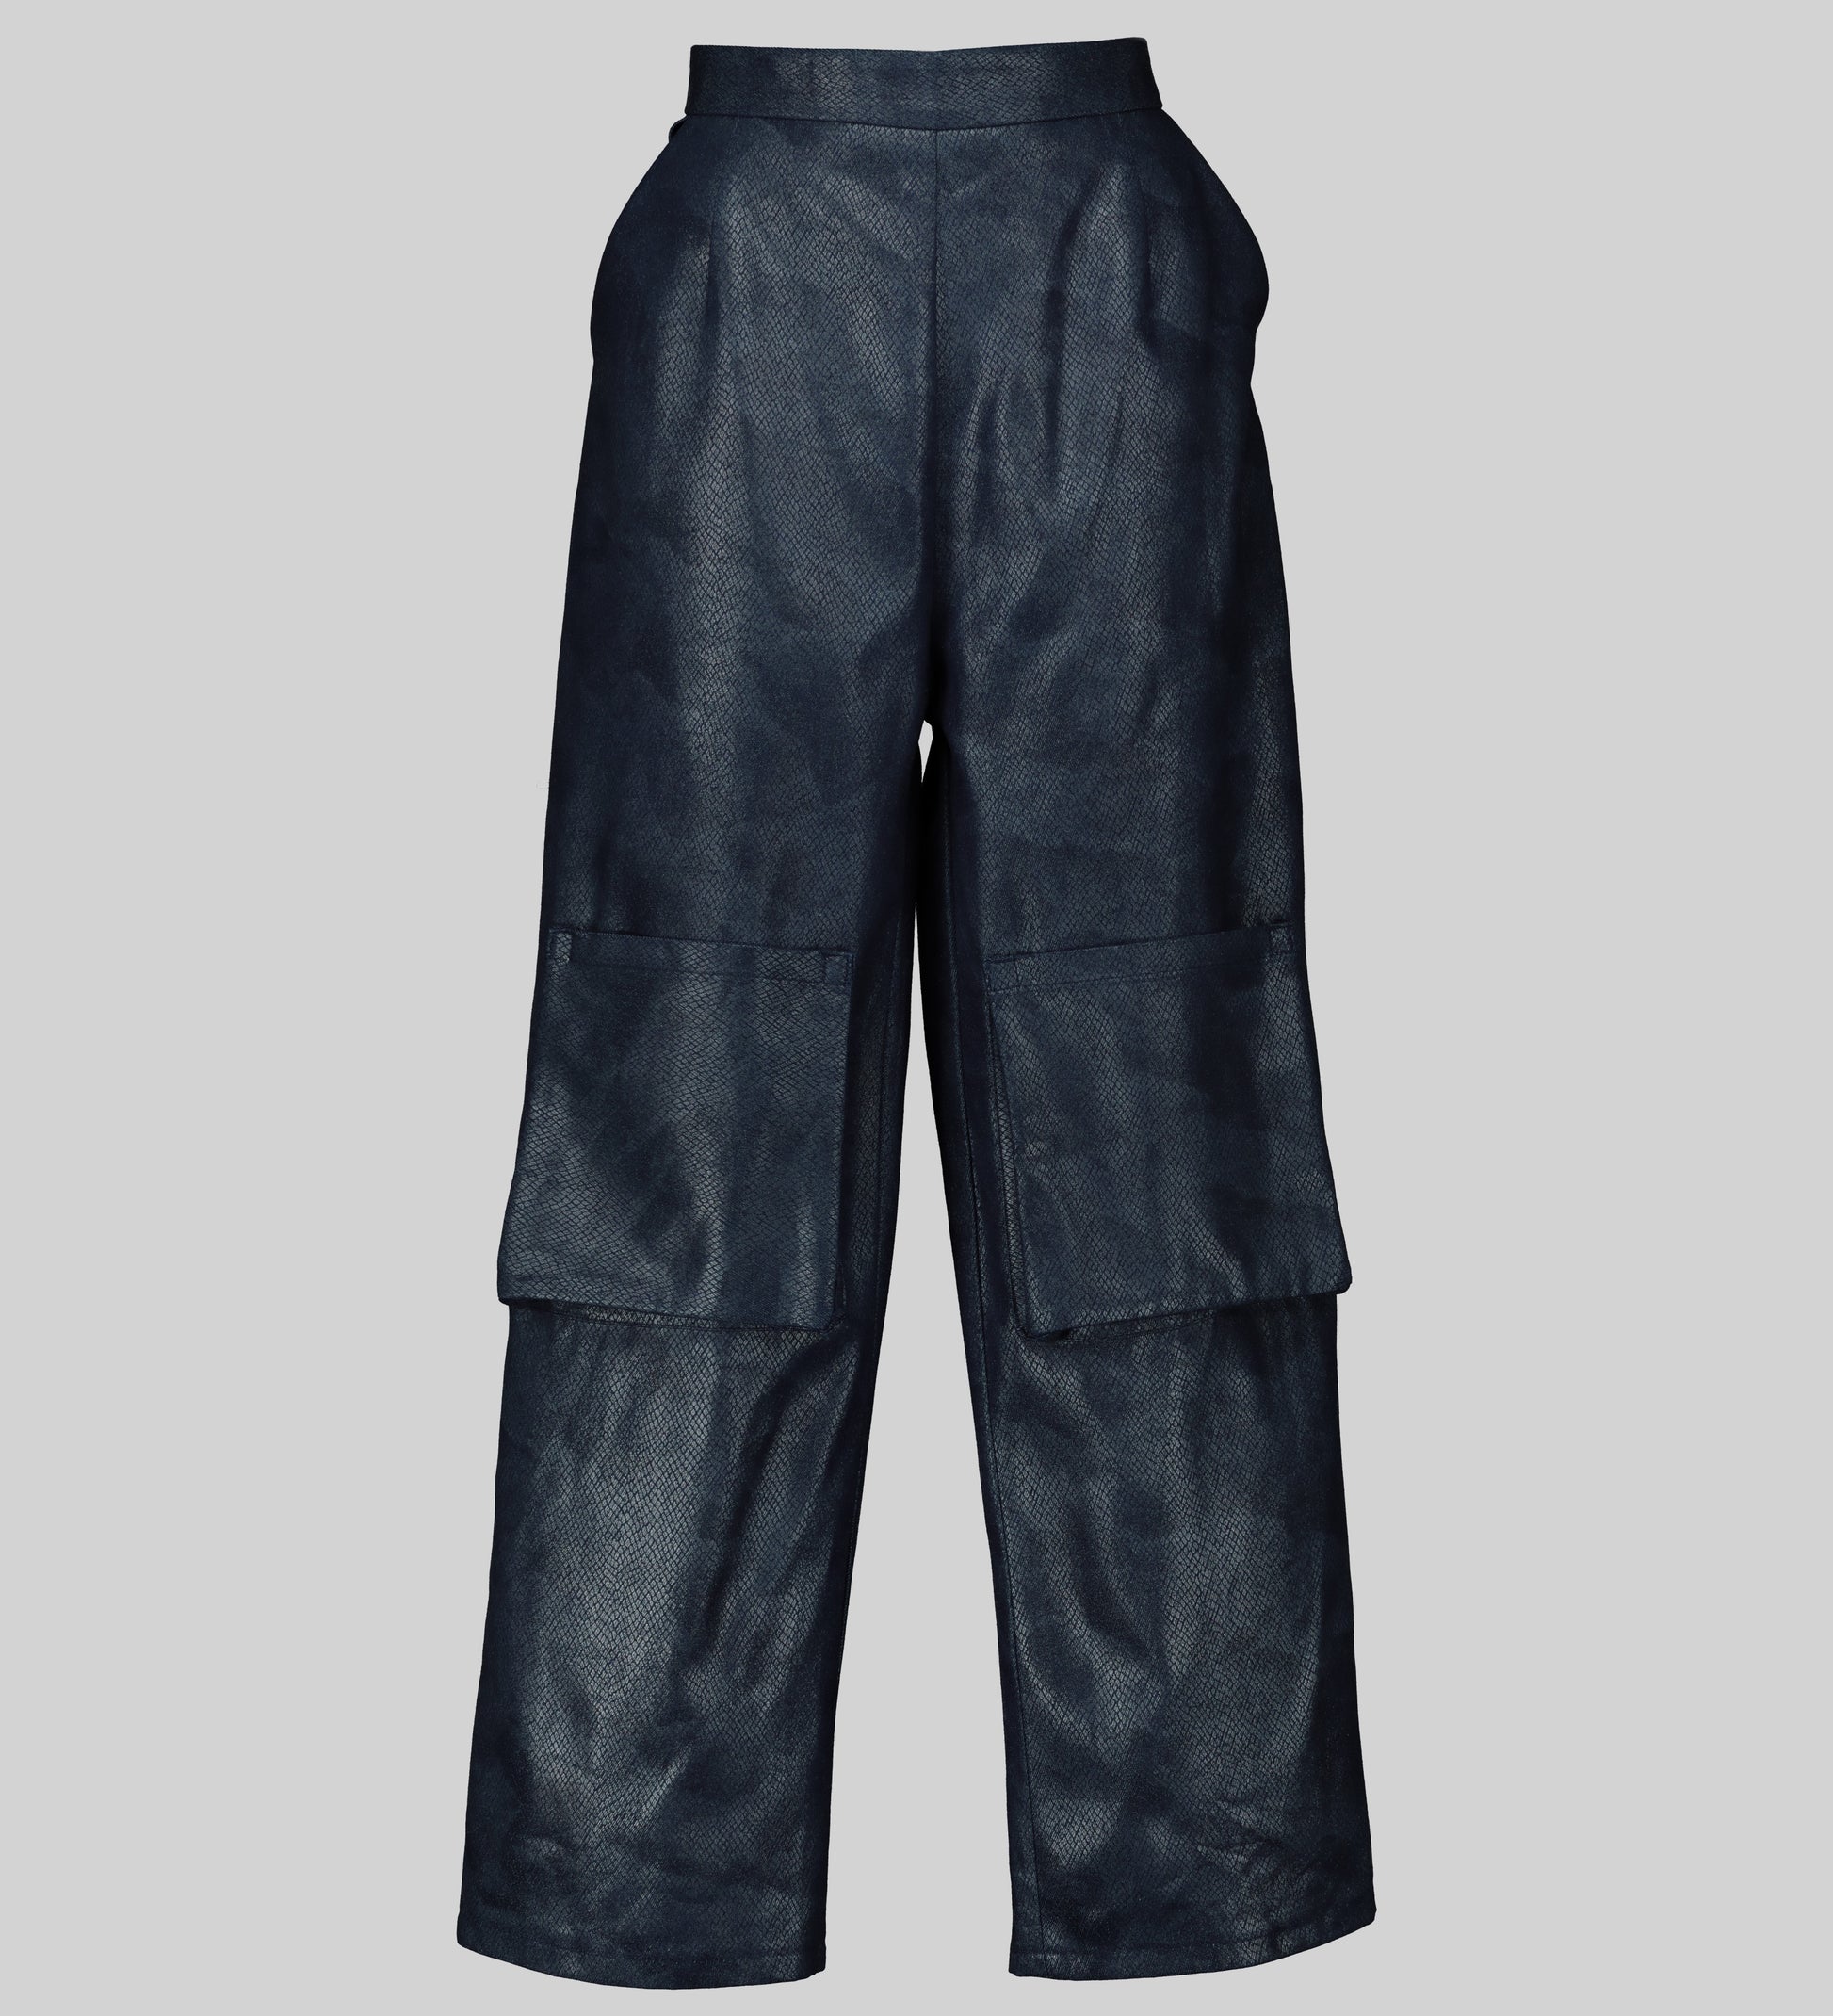 <img src="pic.gif" alt="Front view of AFIPRIVE denim cargo pants with a grey square pattern." />